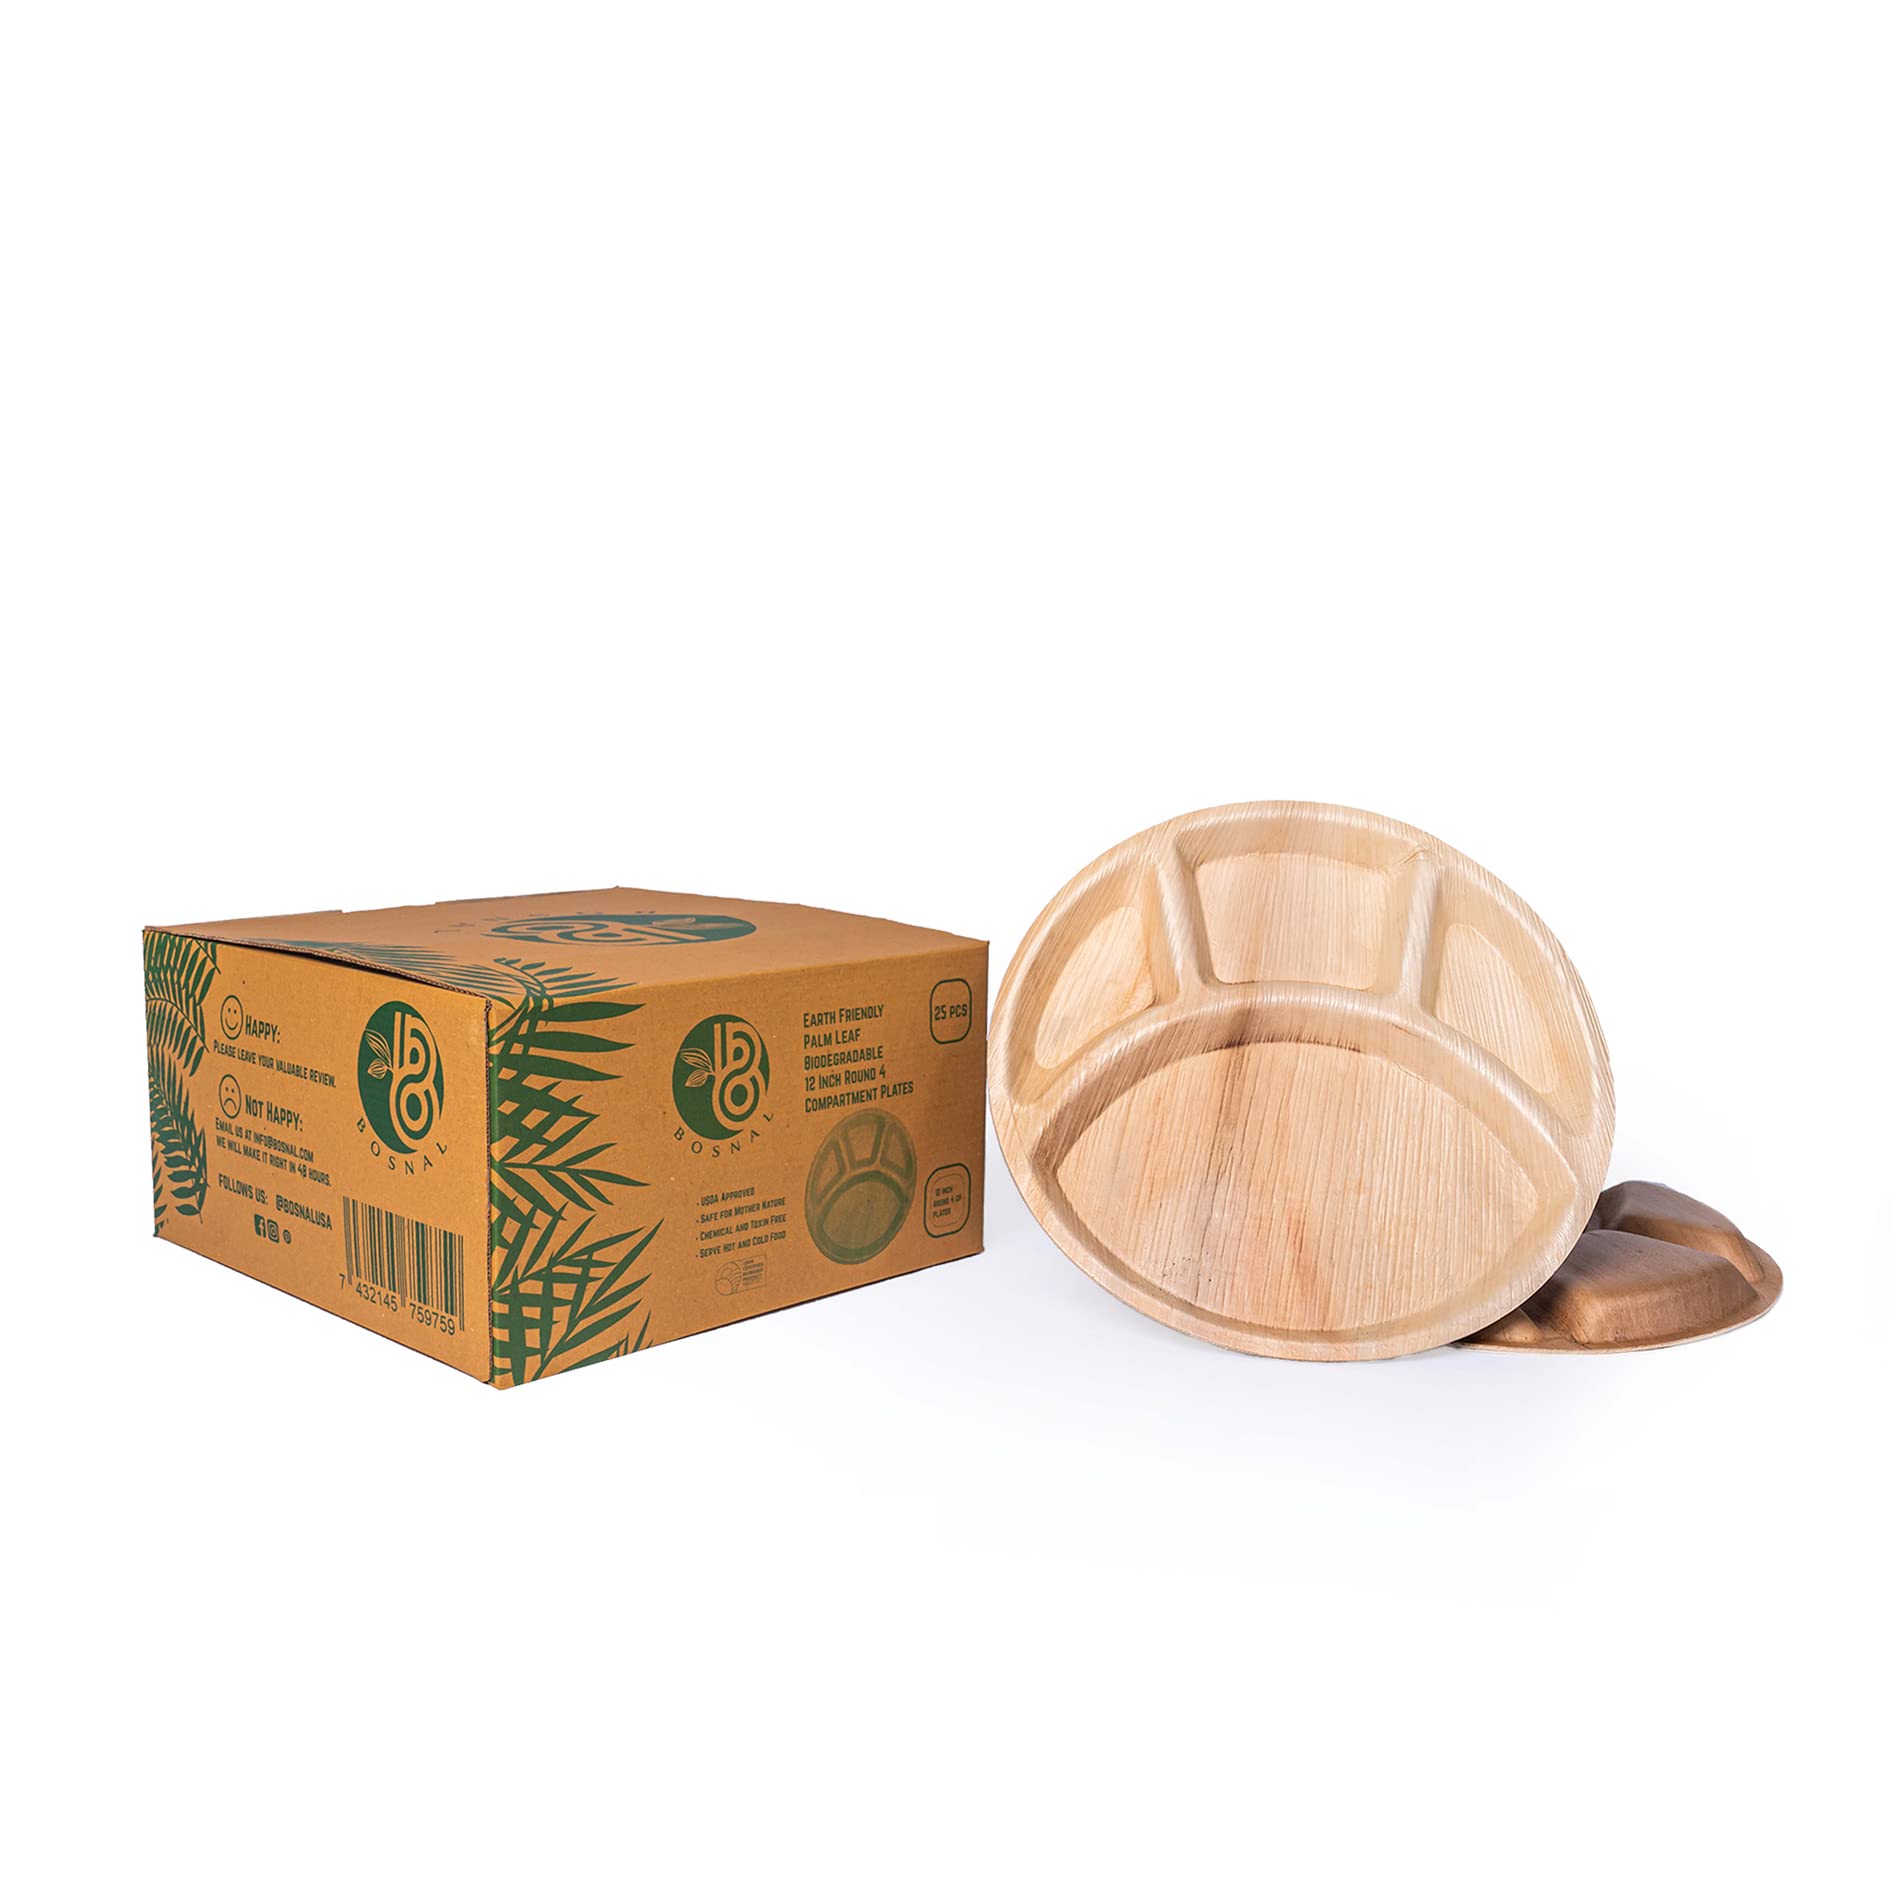 Bosnal - Palm Leaf Biodegradable Plates, 12 inch Round Compartment, 25 pcs.